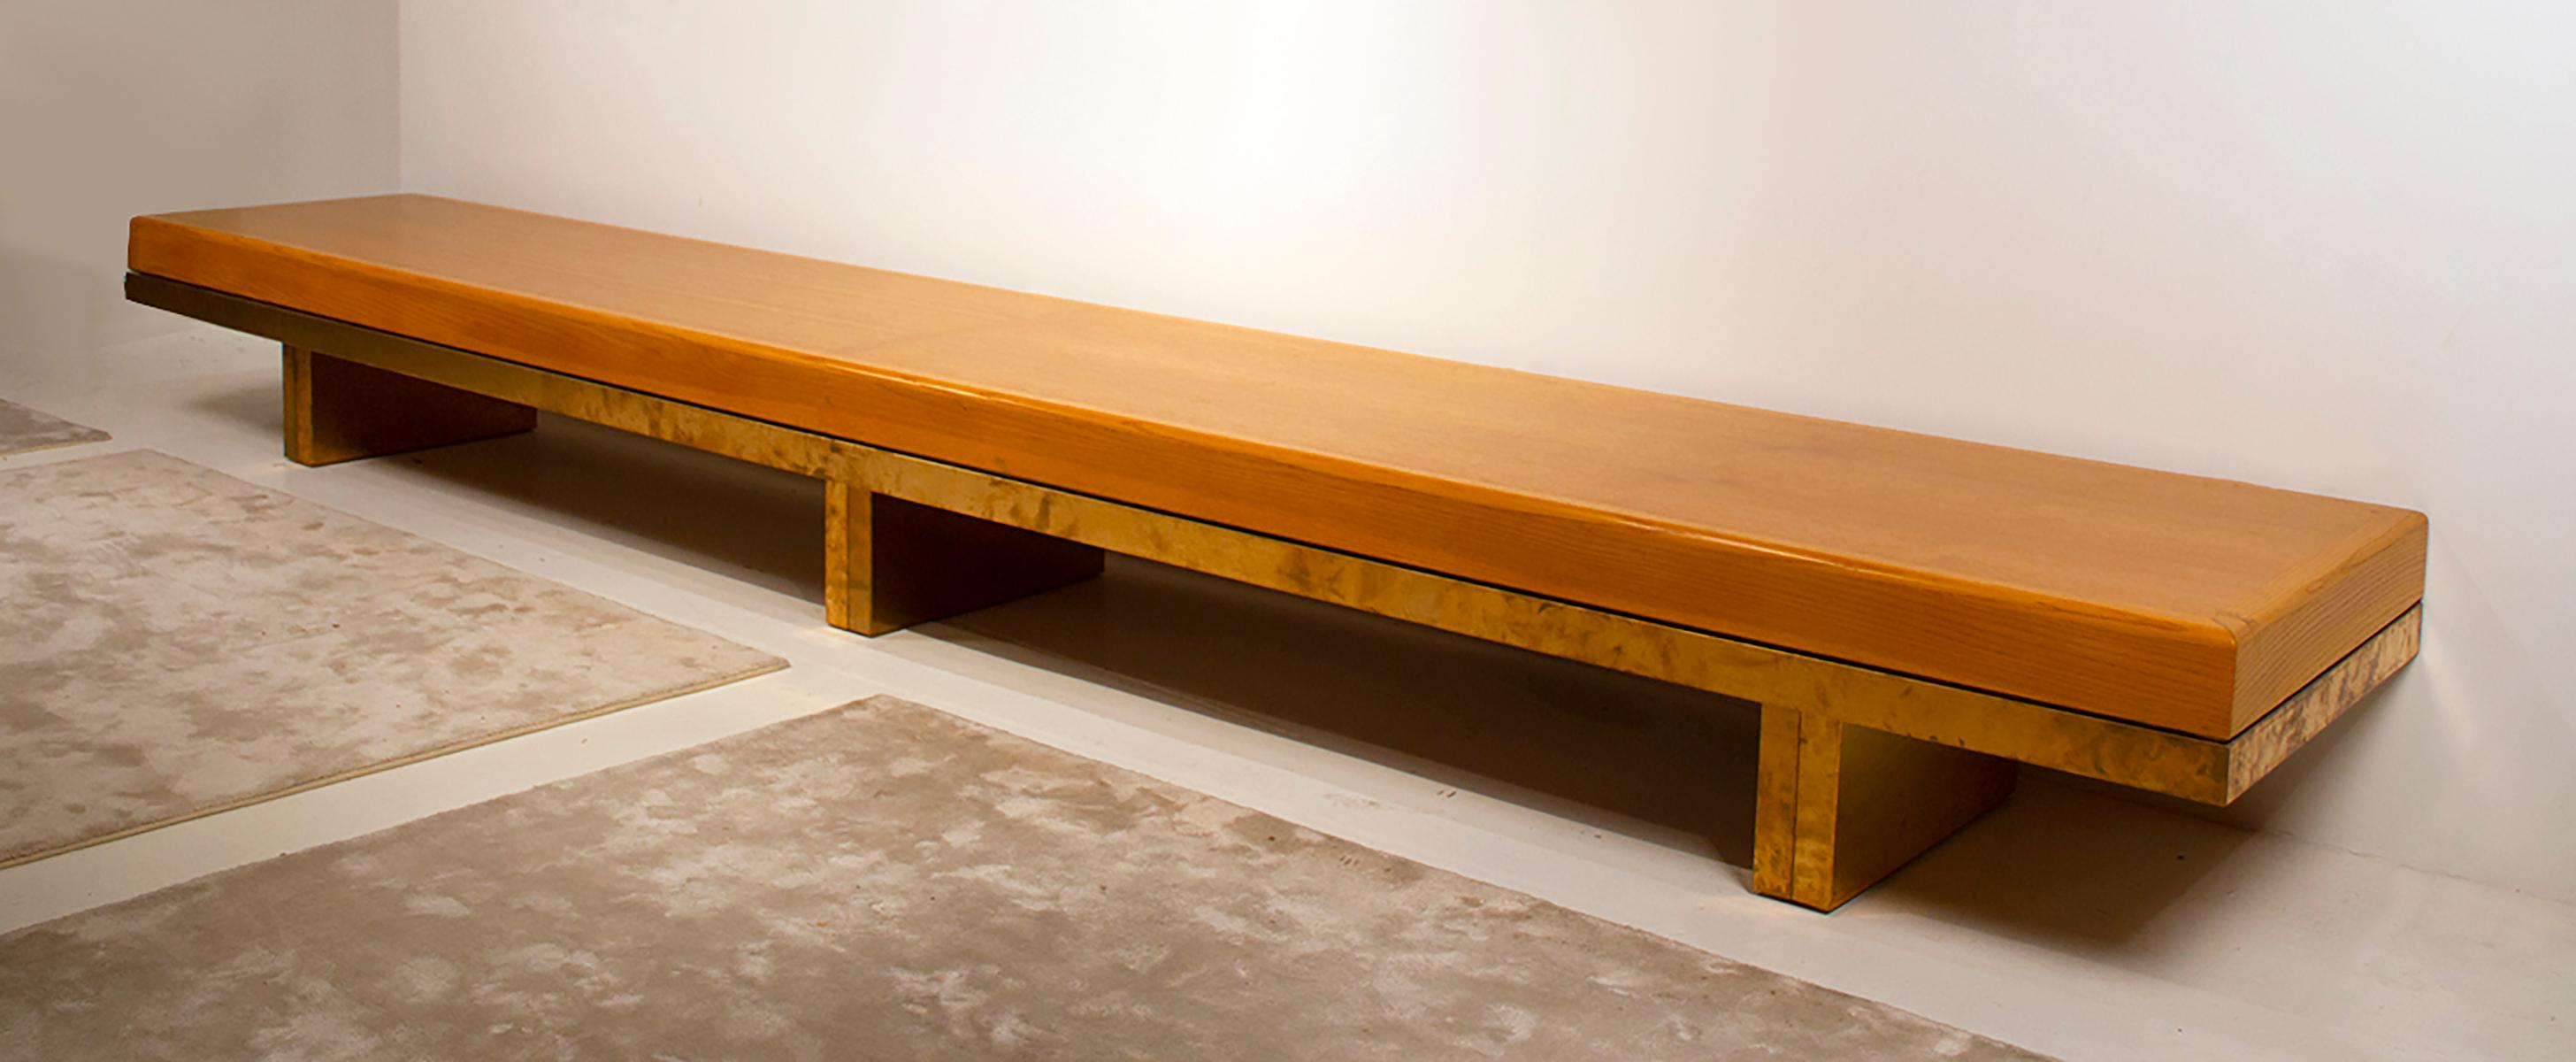 American Architectural Bench from the Iconic I.M. Pei Dallas City Hall For Sale